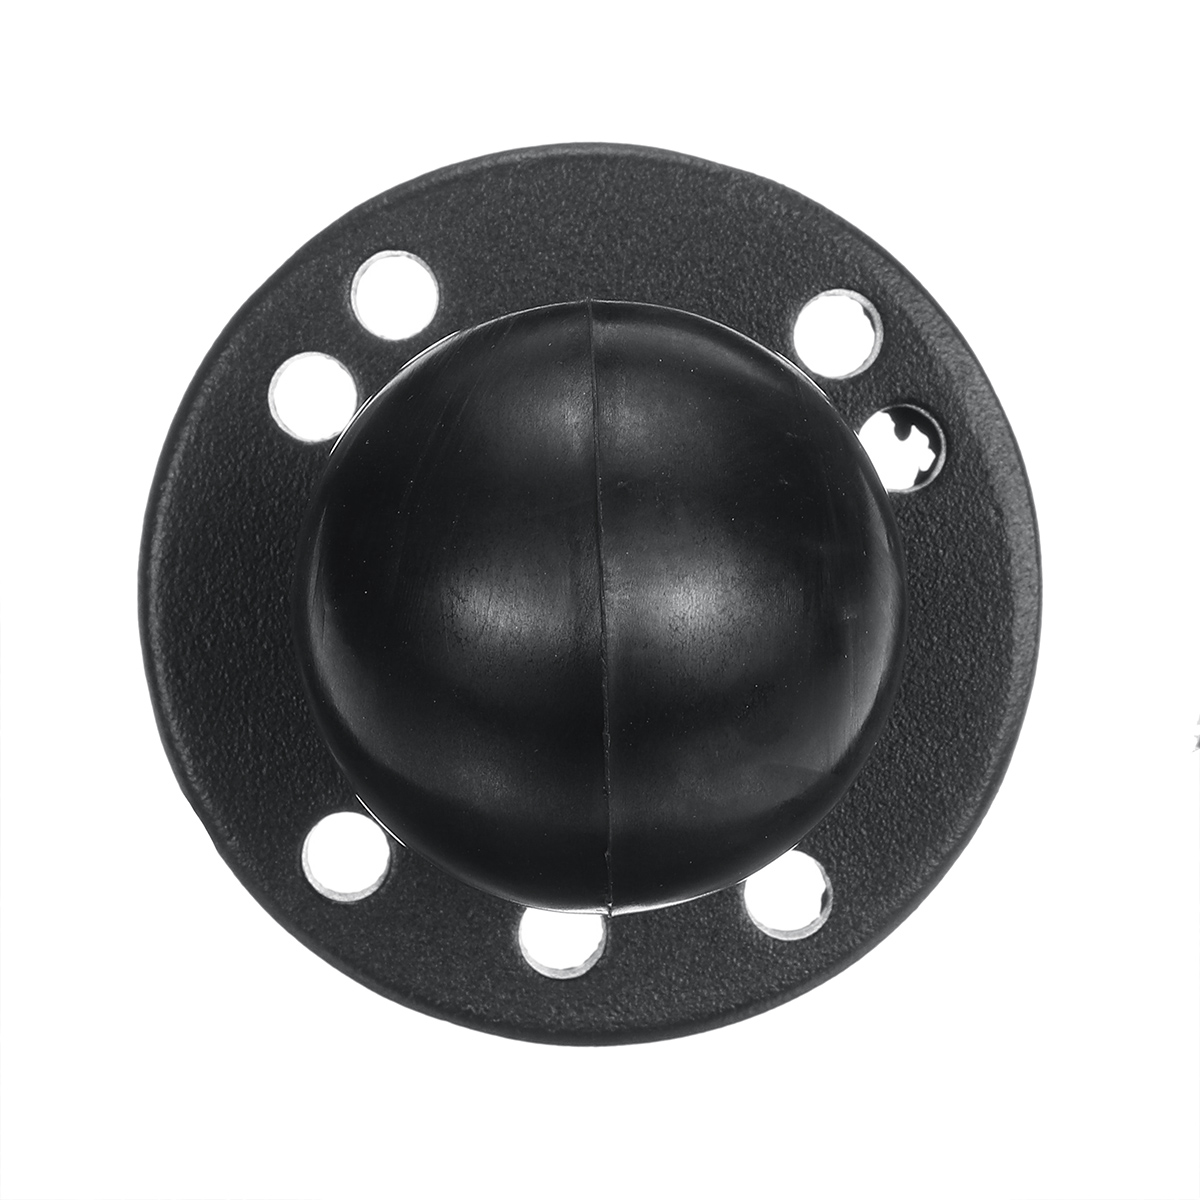 Mounts 2.5 Inch round Base with Amps Hole Pattern & 1.5 Inch Ball for Ship Computer Gps Navigator Bracket Fixed Ball Head